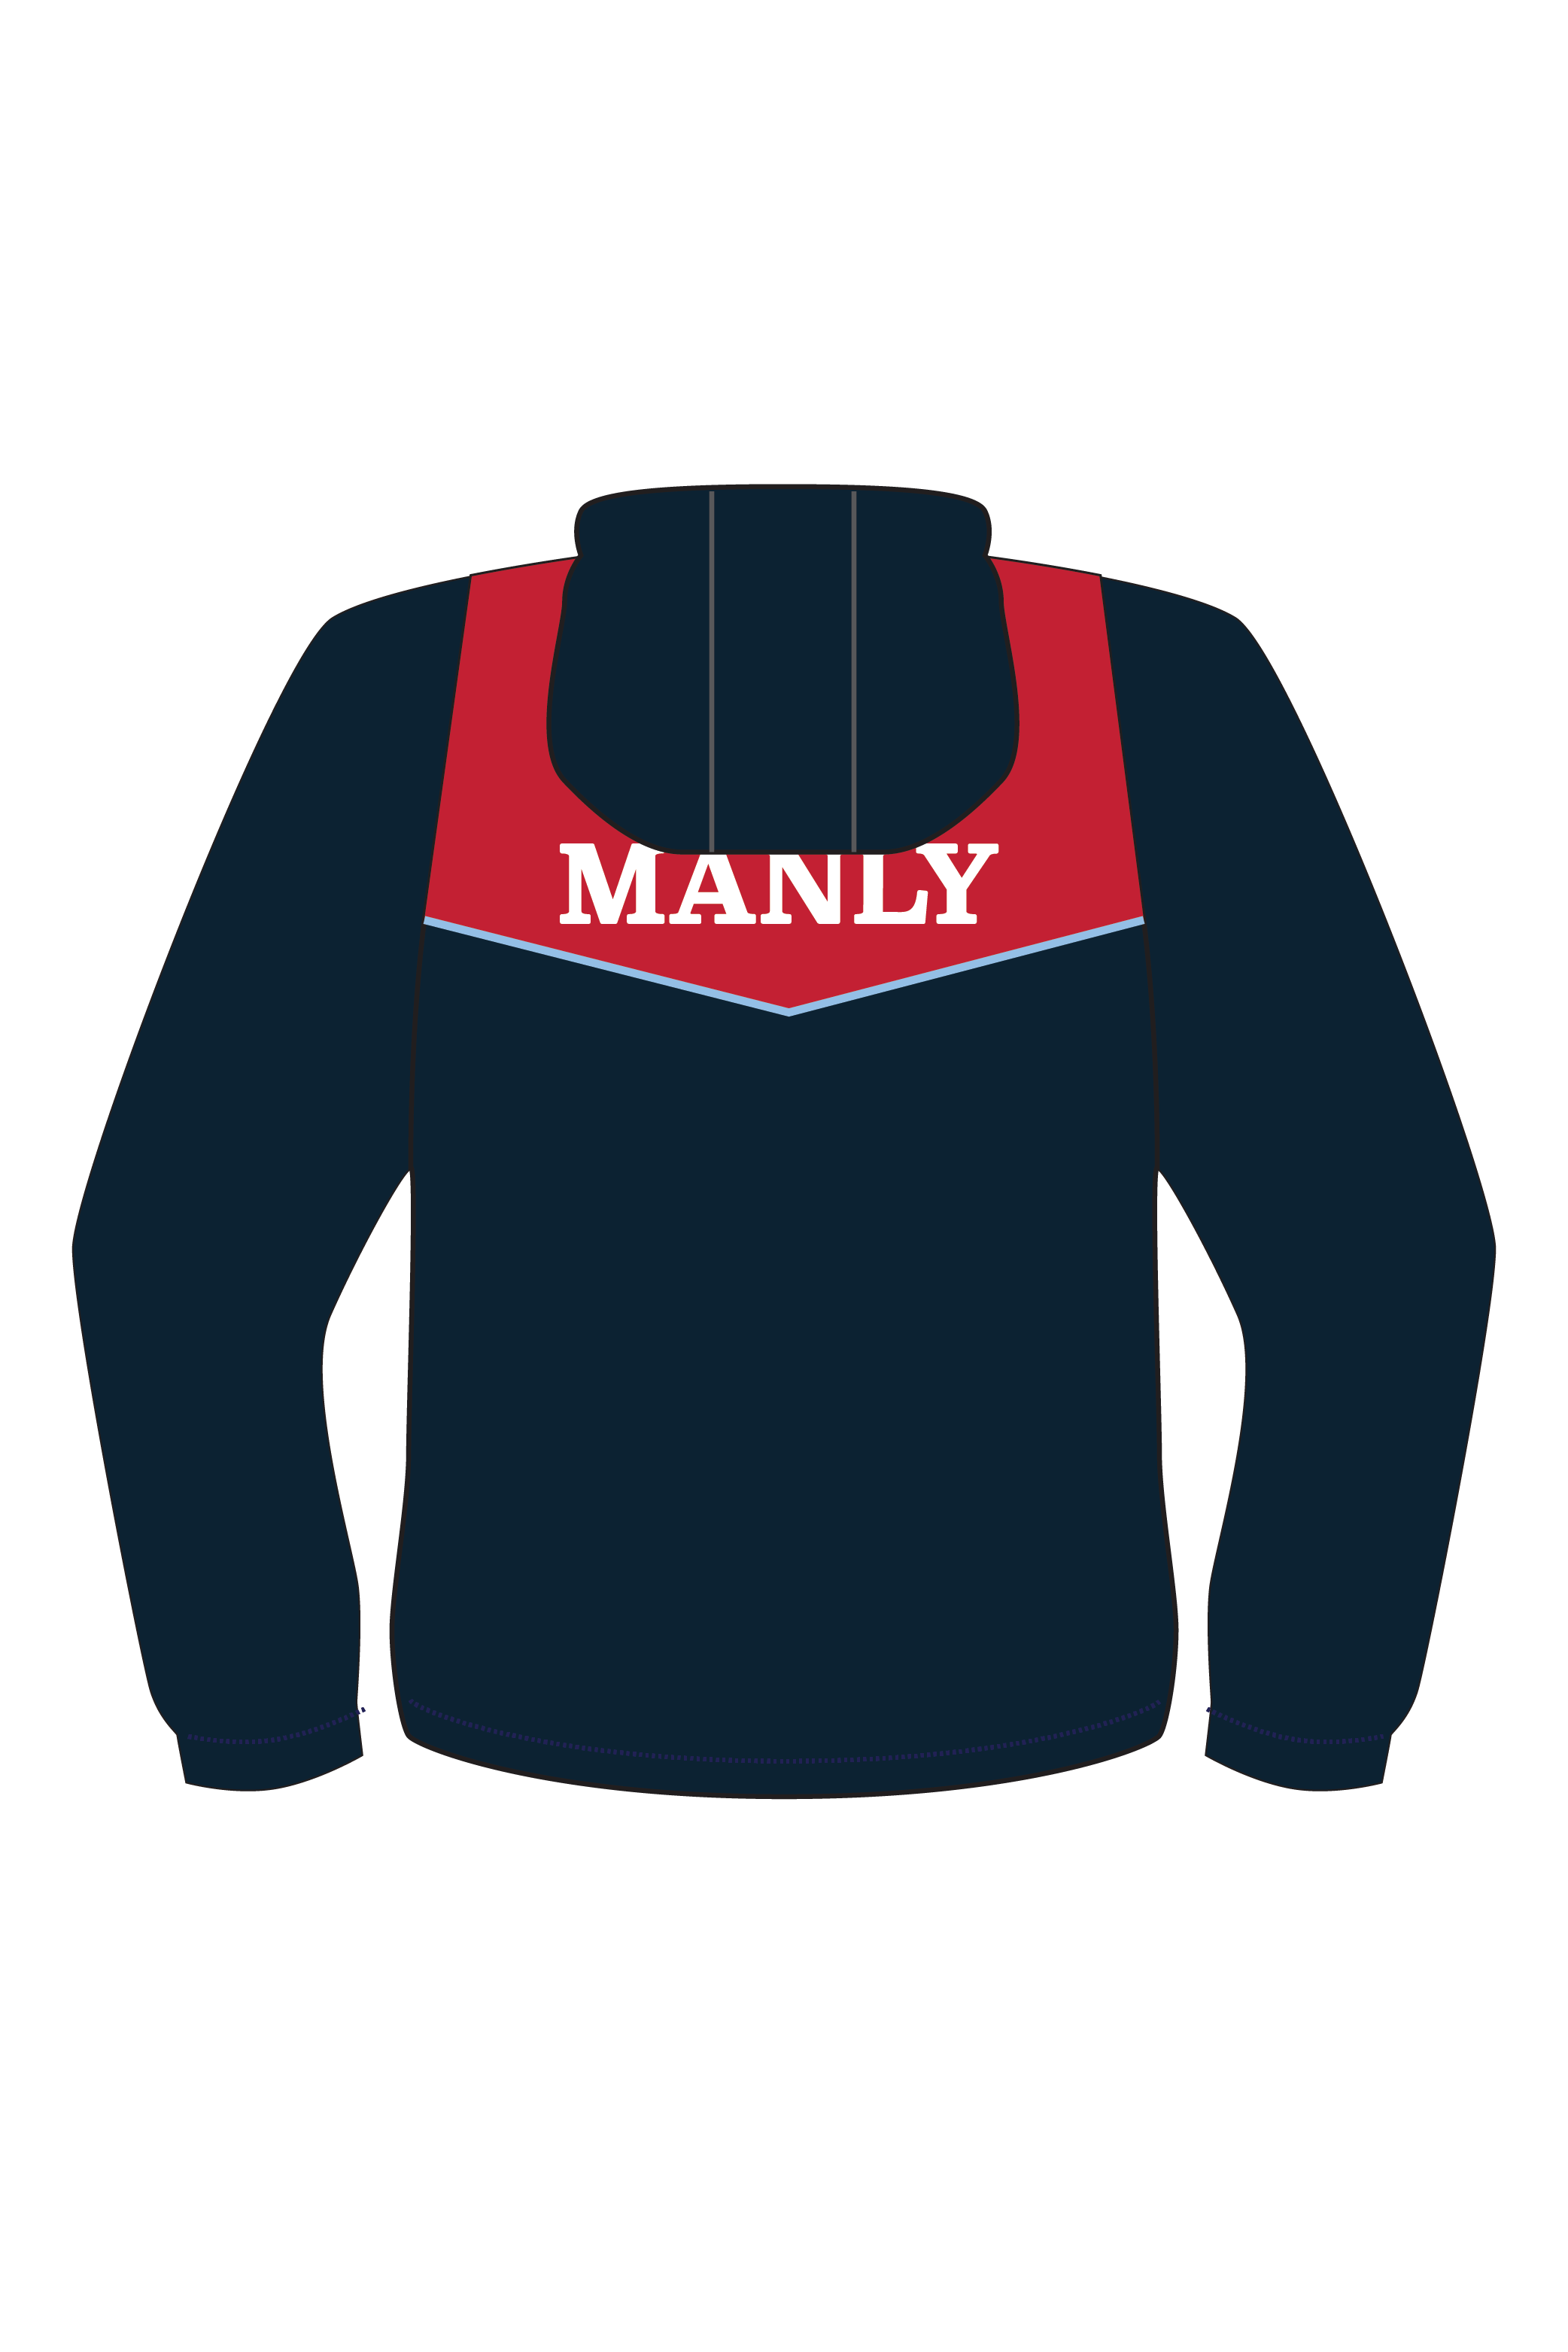 Manly Swimming Club Sports Jacket